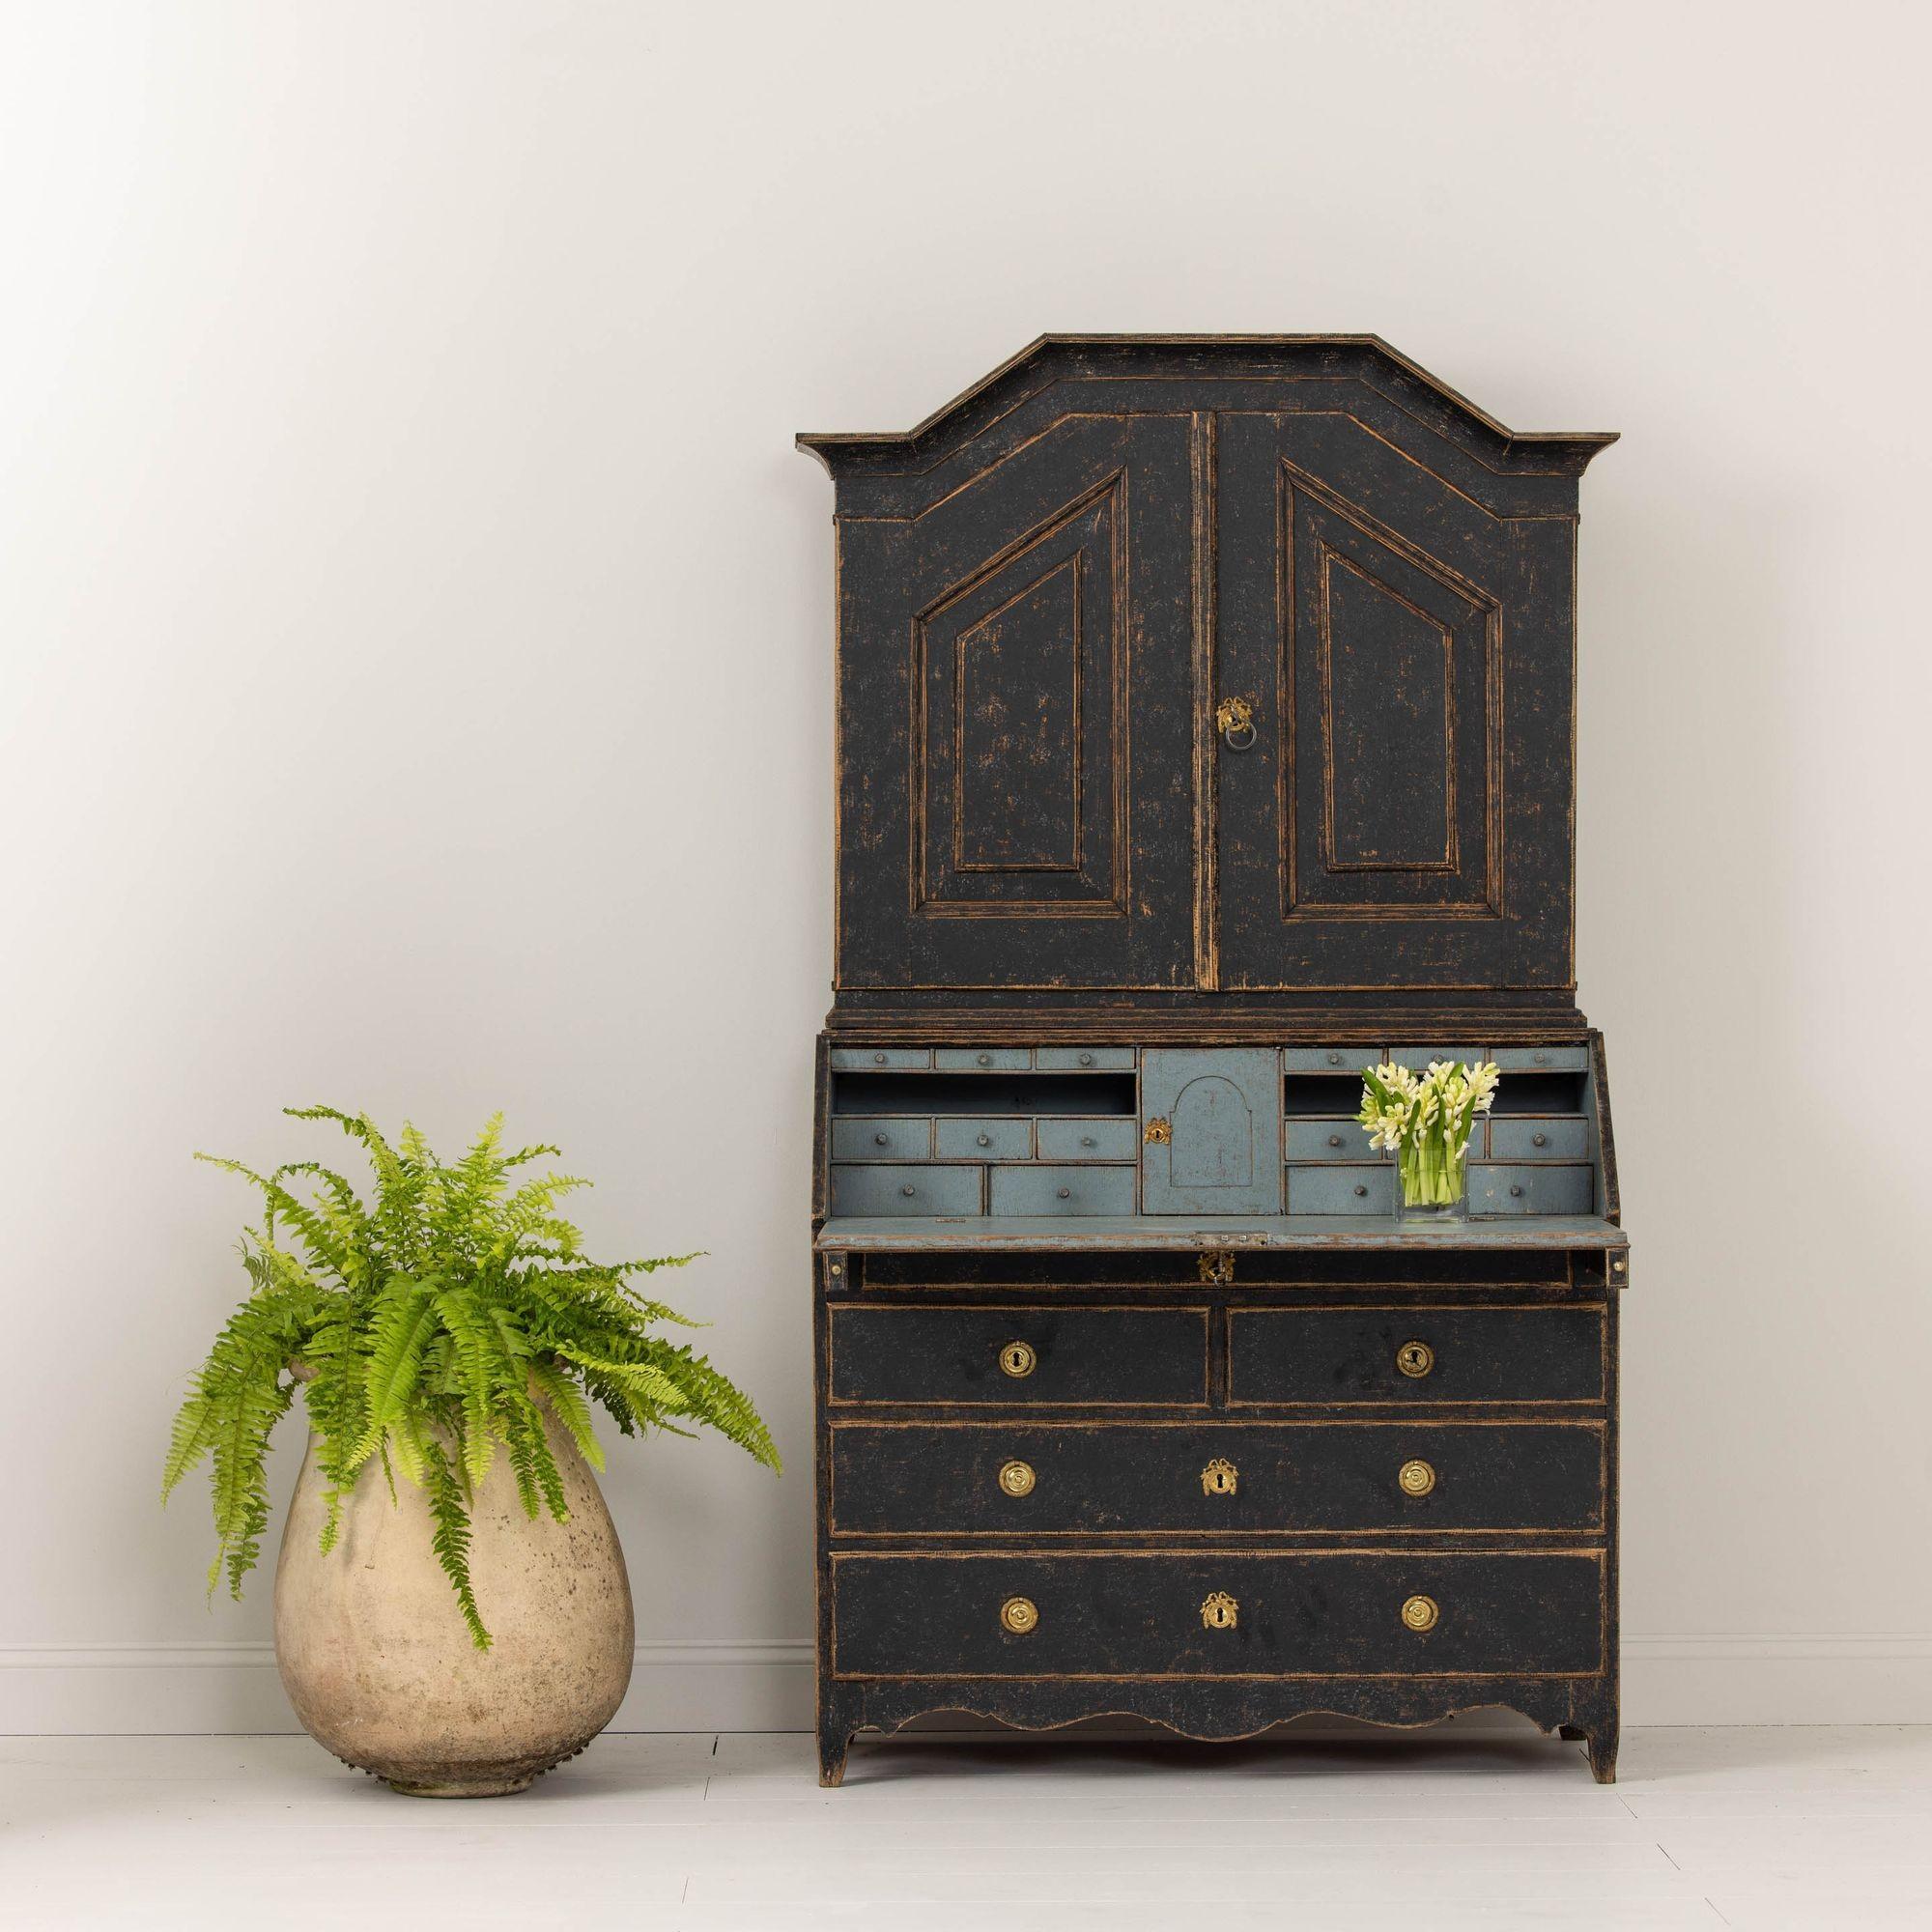 This is an exceptional Swedish secretary with library, circa 1780. This secretary has retained its original brass hardware and locks and is wearing black paint on the exterior with beautiful blue paint on the interior. The upper section has three